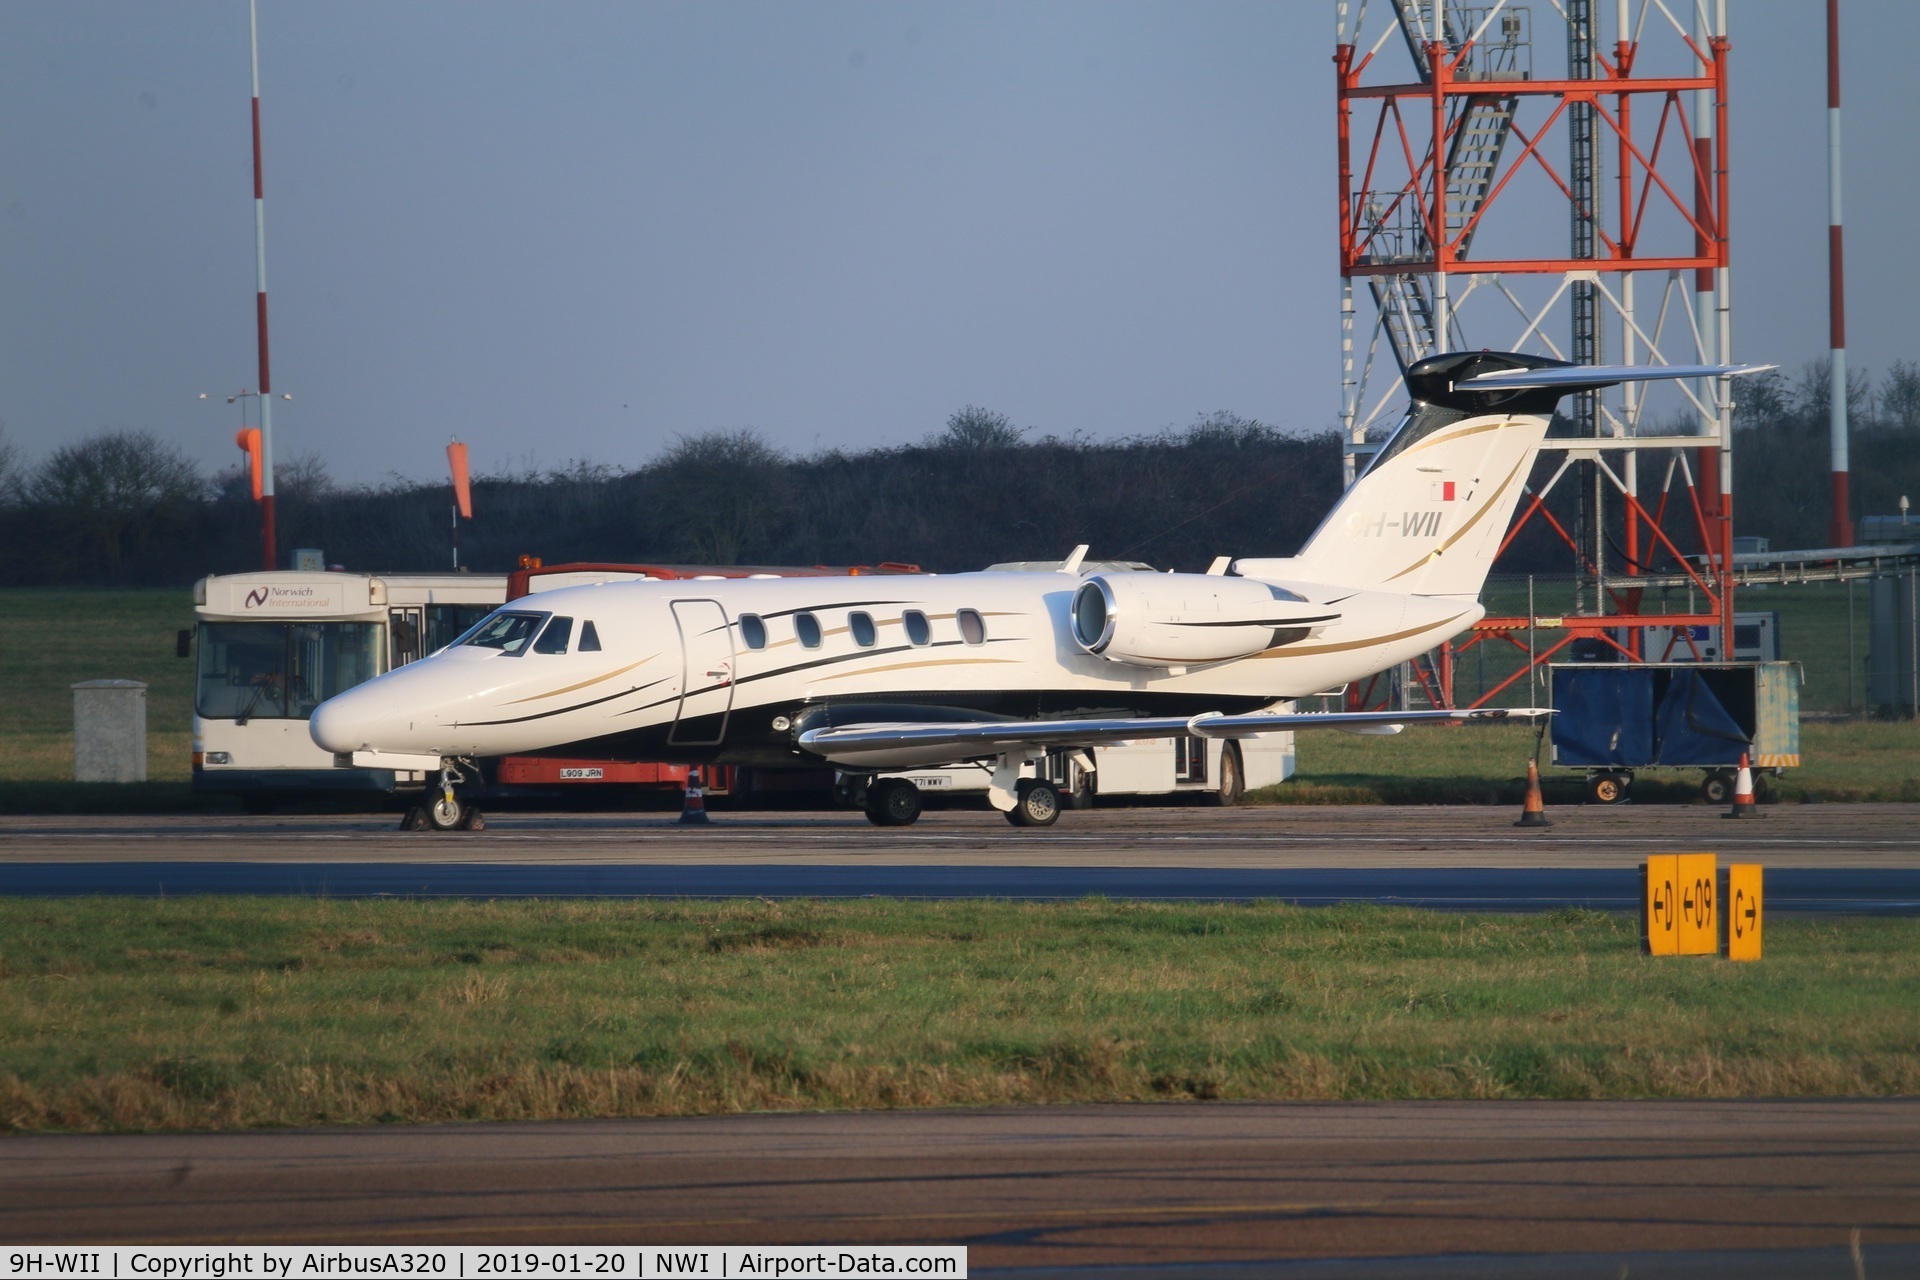 9H-WII, 1998 Cessna 650 Citation VII C/N 650-7090, Parked on stand 7 at Norwich